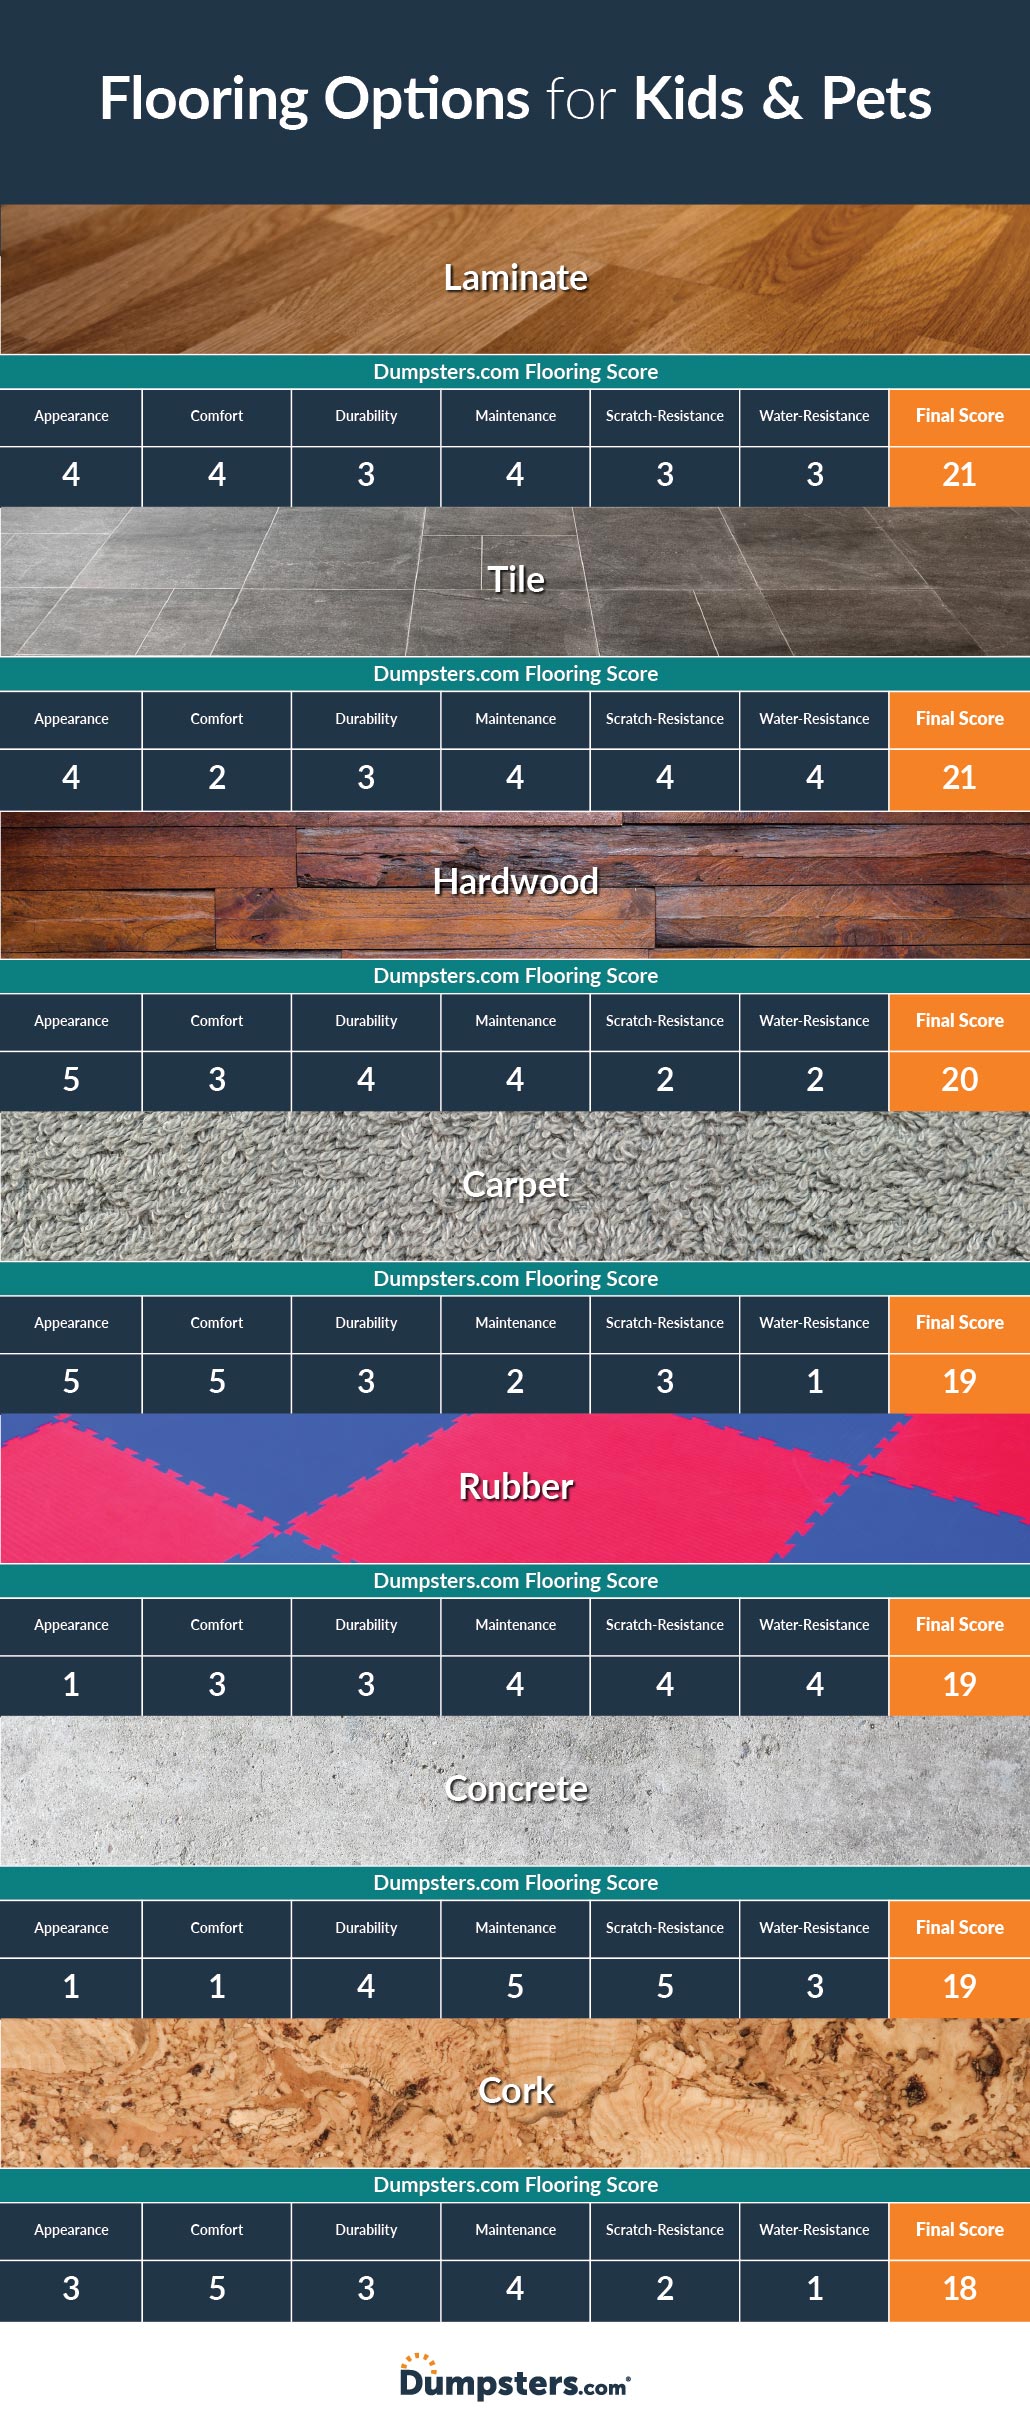 Dumpsters.com Infographic of the Top 7 Best Flooring Options for Families with Kids and Pets.